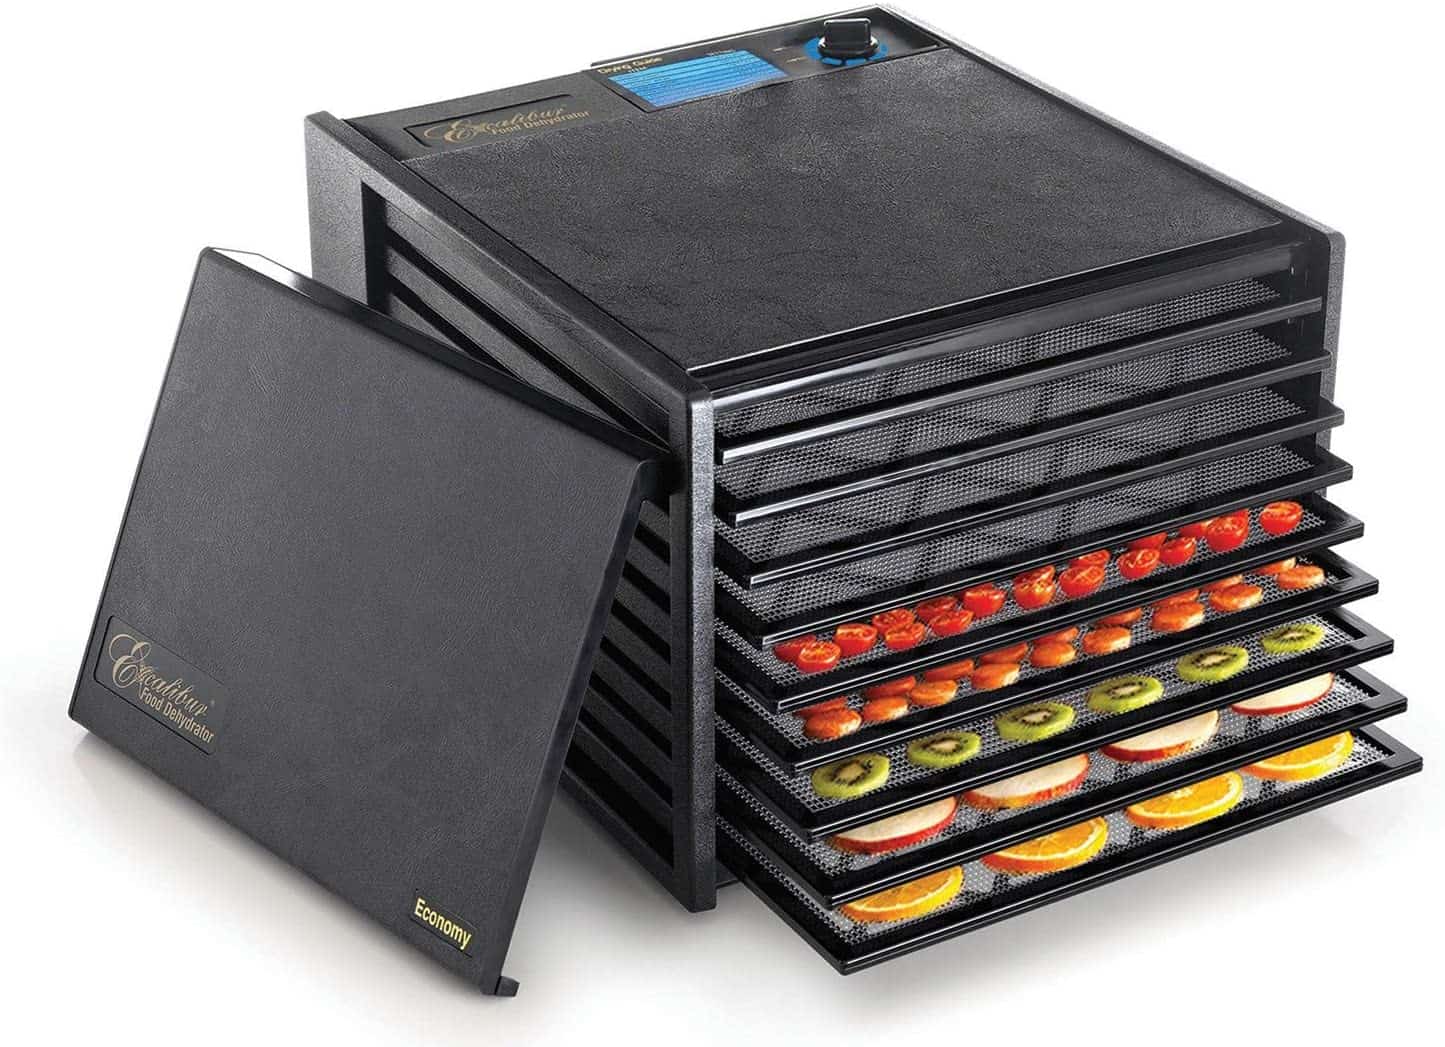 Excalibur 9-Tray Electric Food Dehydrator with Adjustable Thermostat For Temperature Control Patented Technology For faster & Efficient 15 Square Feet Drying Space, Black